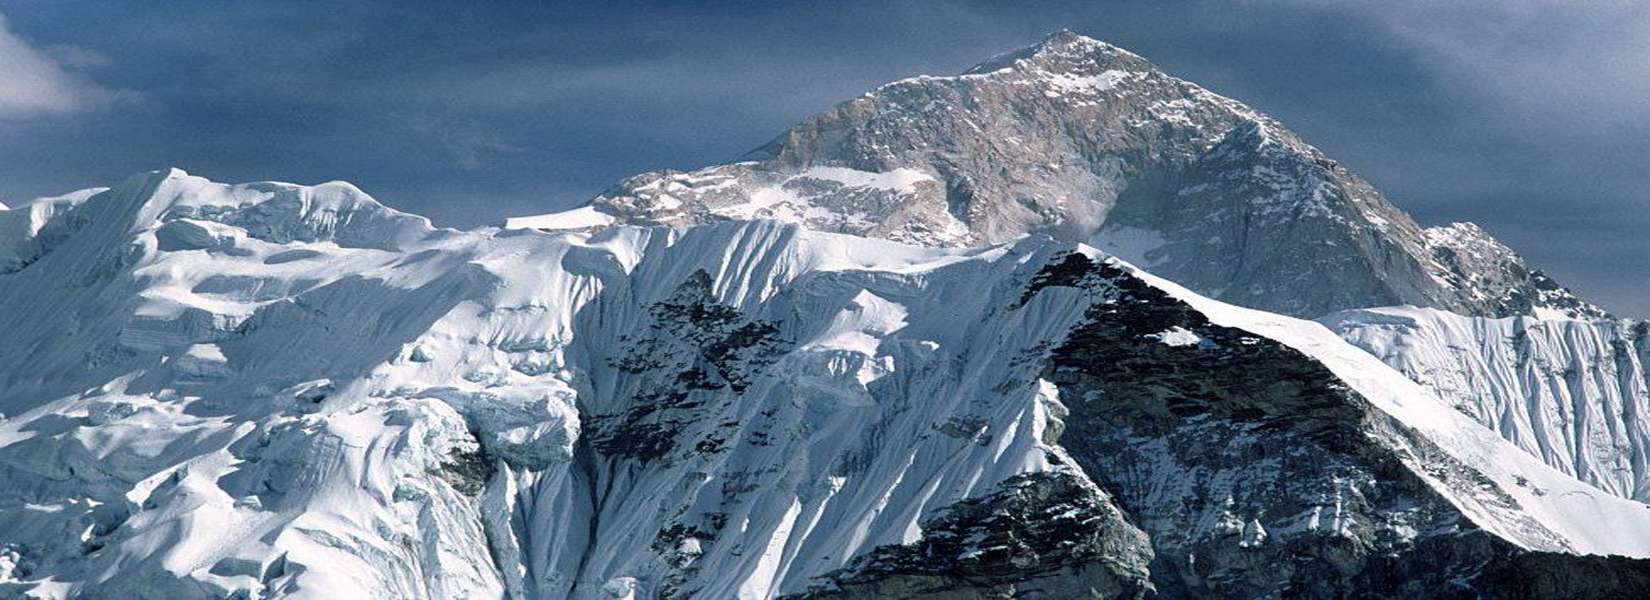 The new height of Mount Everest 8,848.86 meters